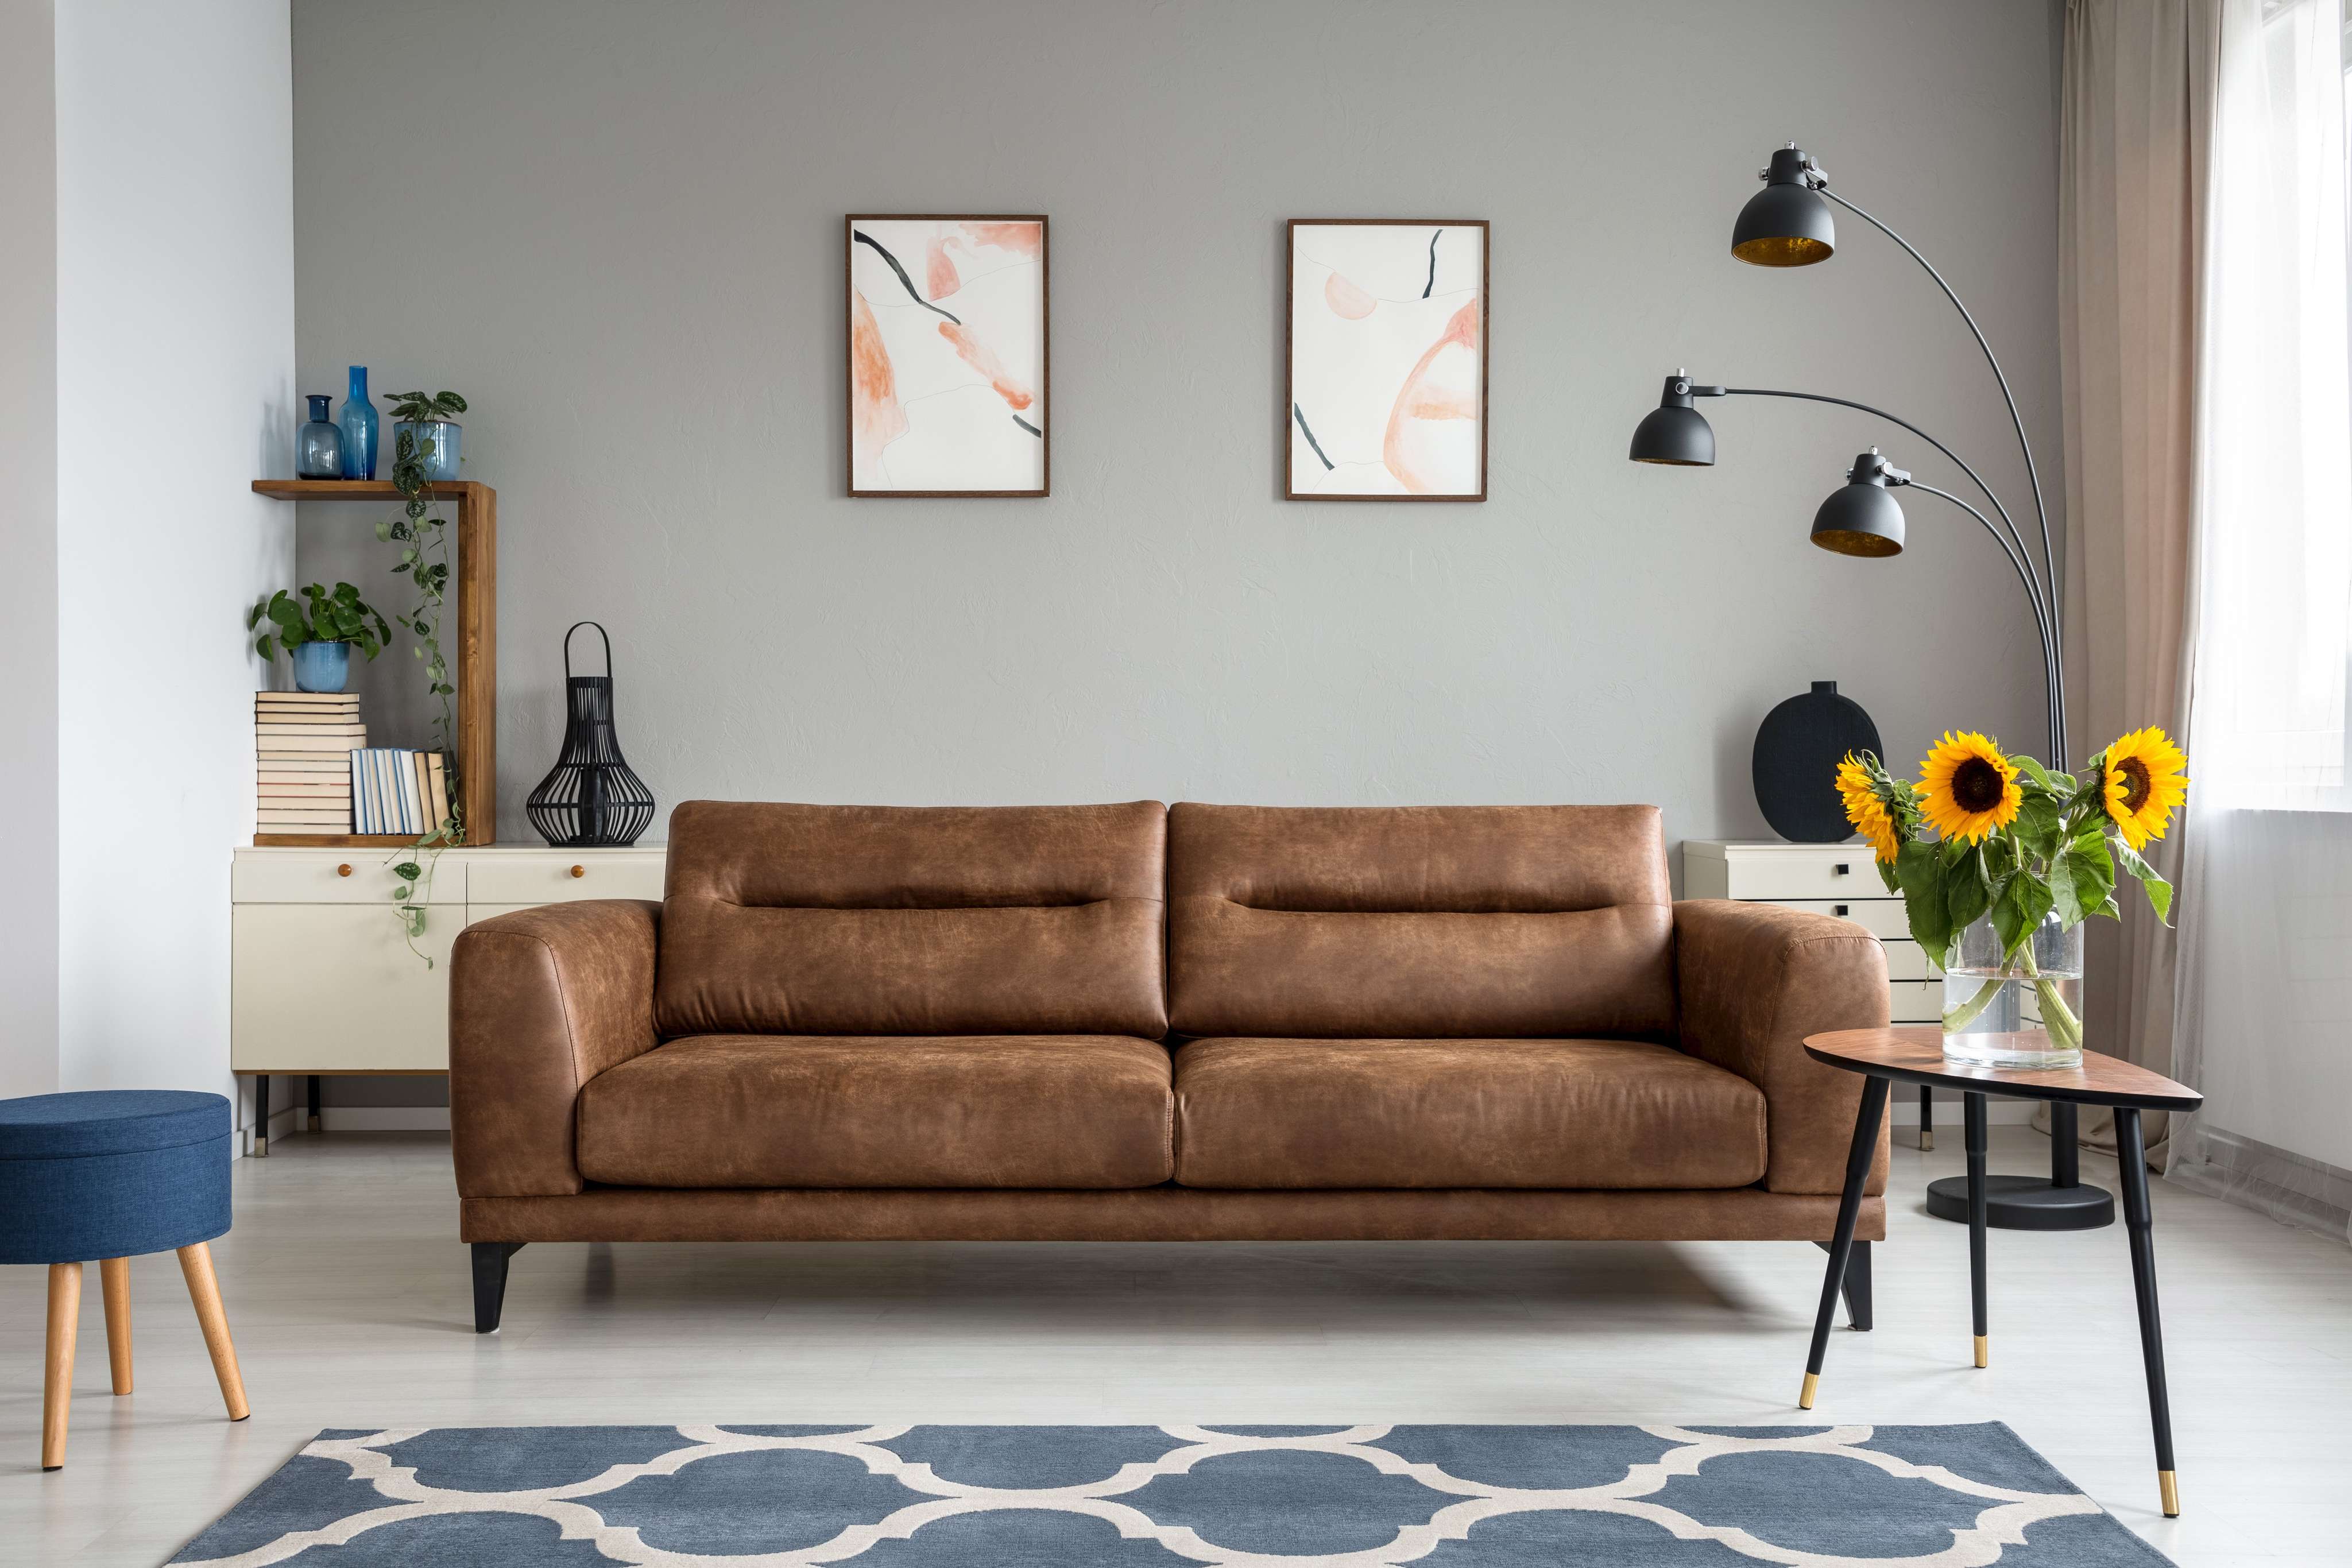 Simple Living Room Interior Design featuring a Brown Leather Sofa